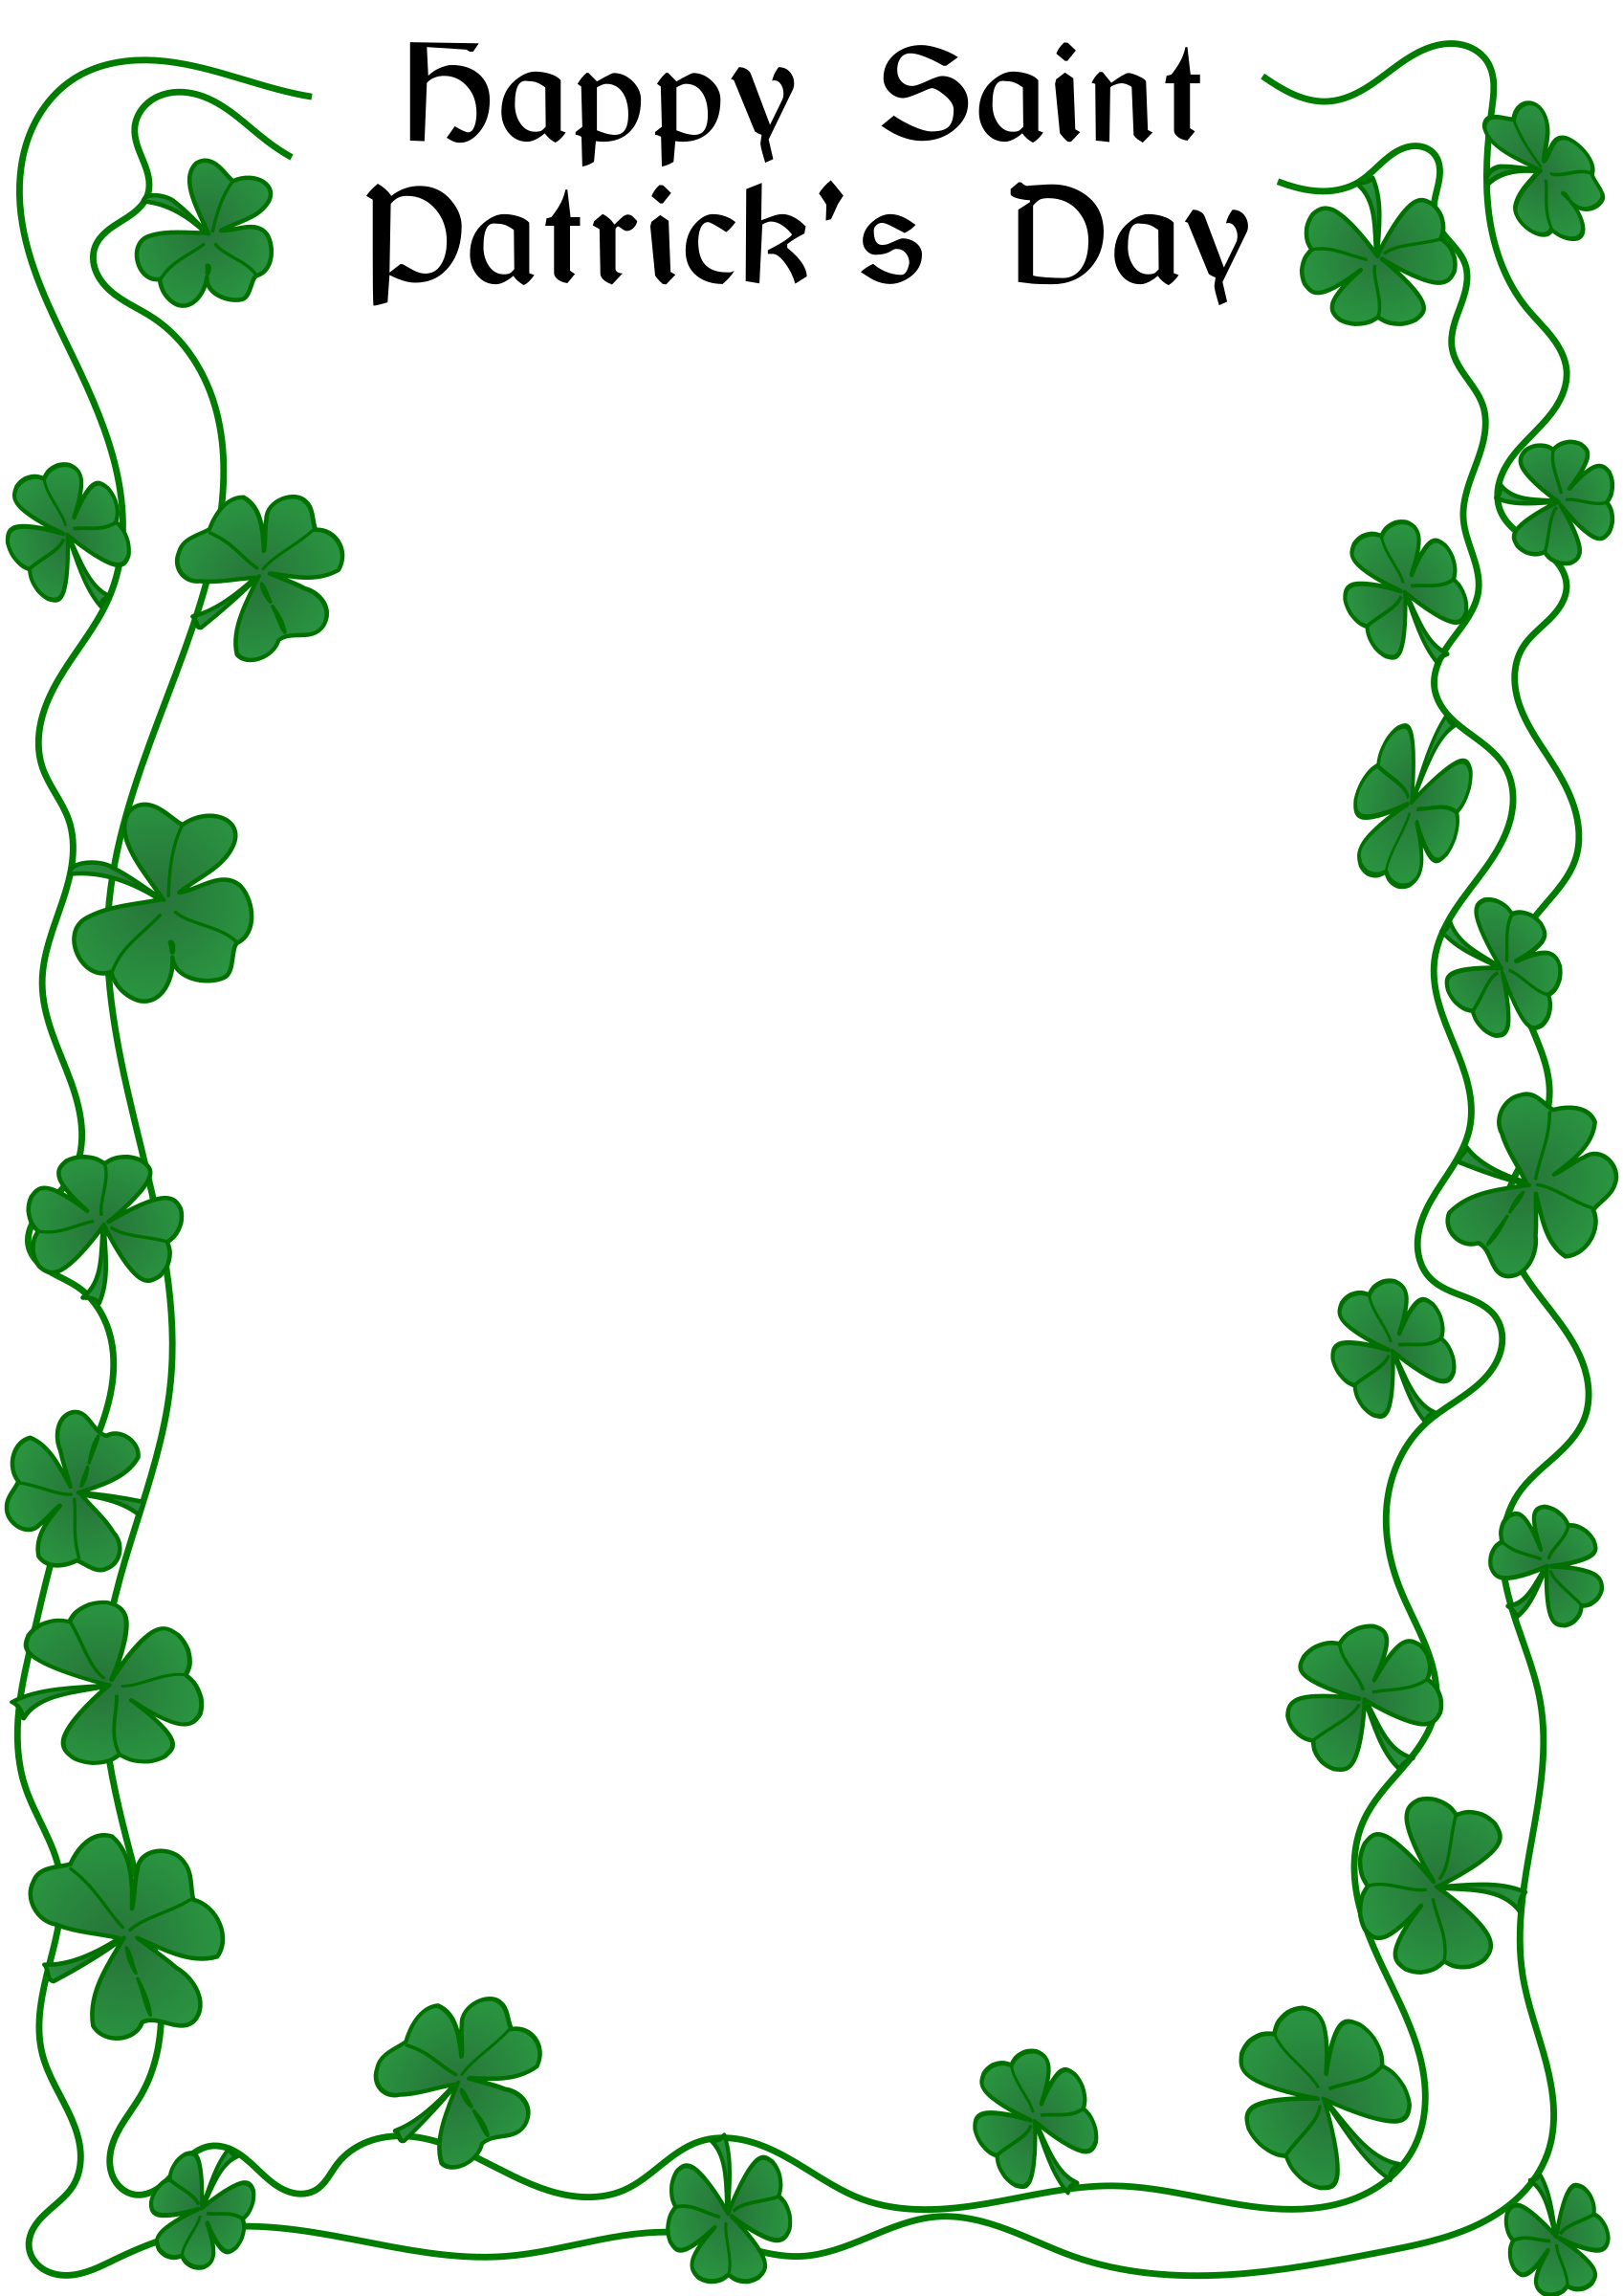 flags clipart st patricks day